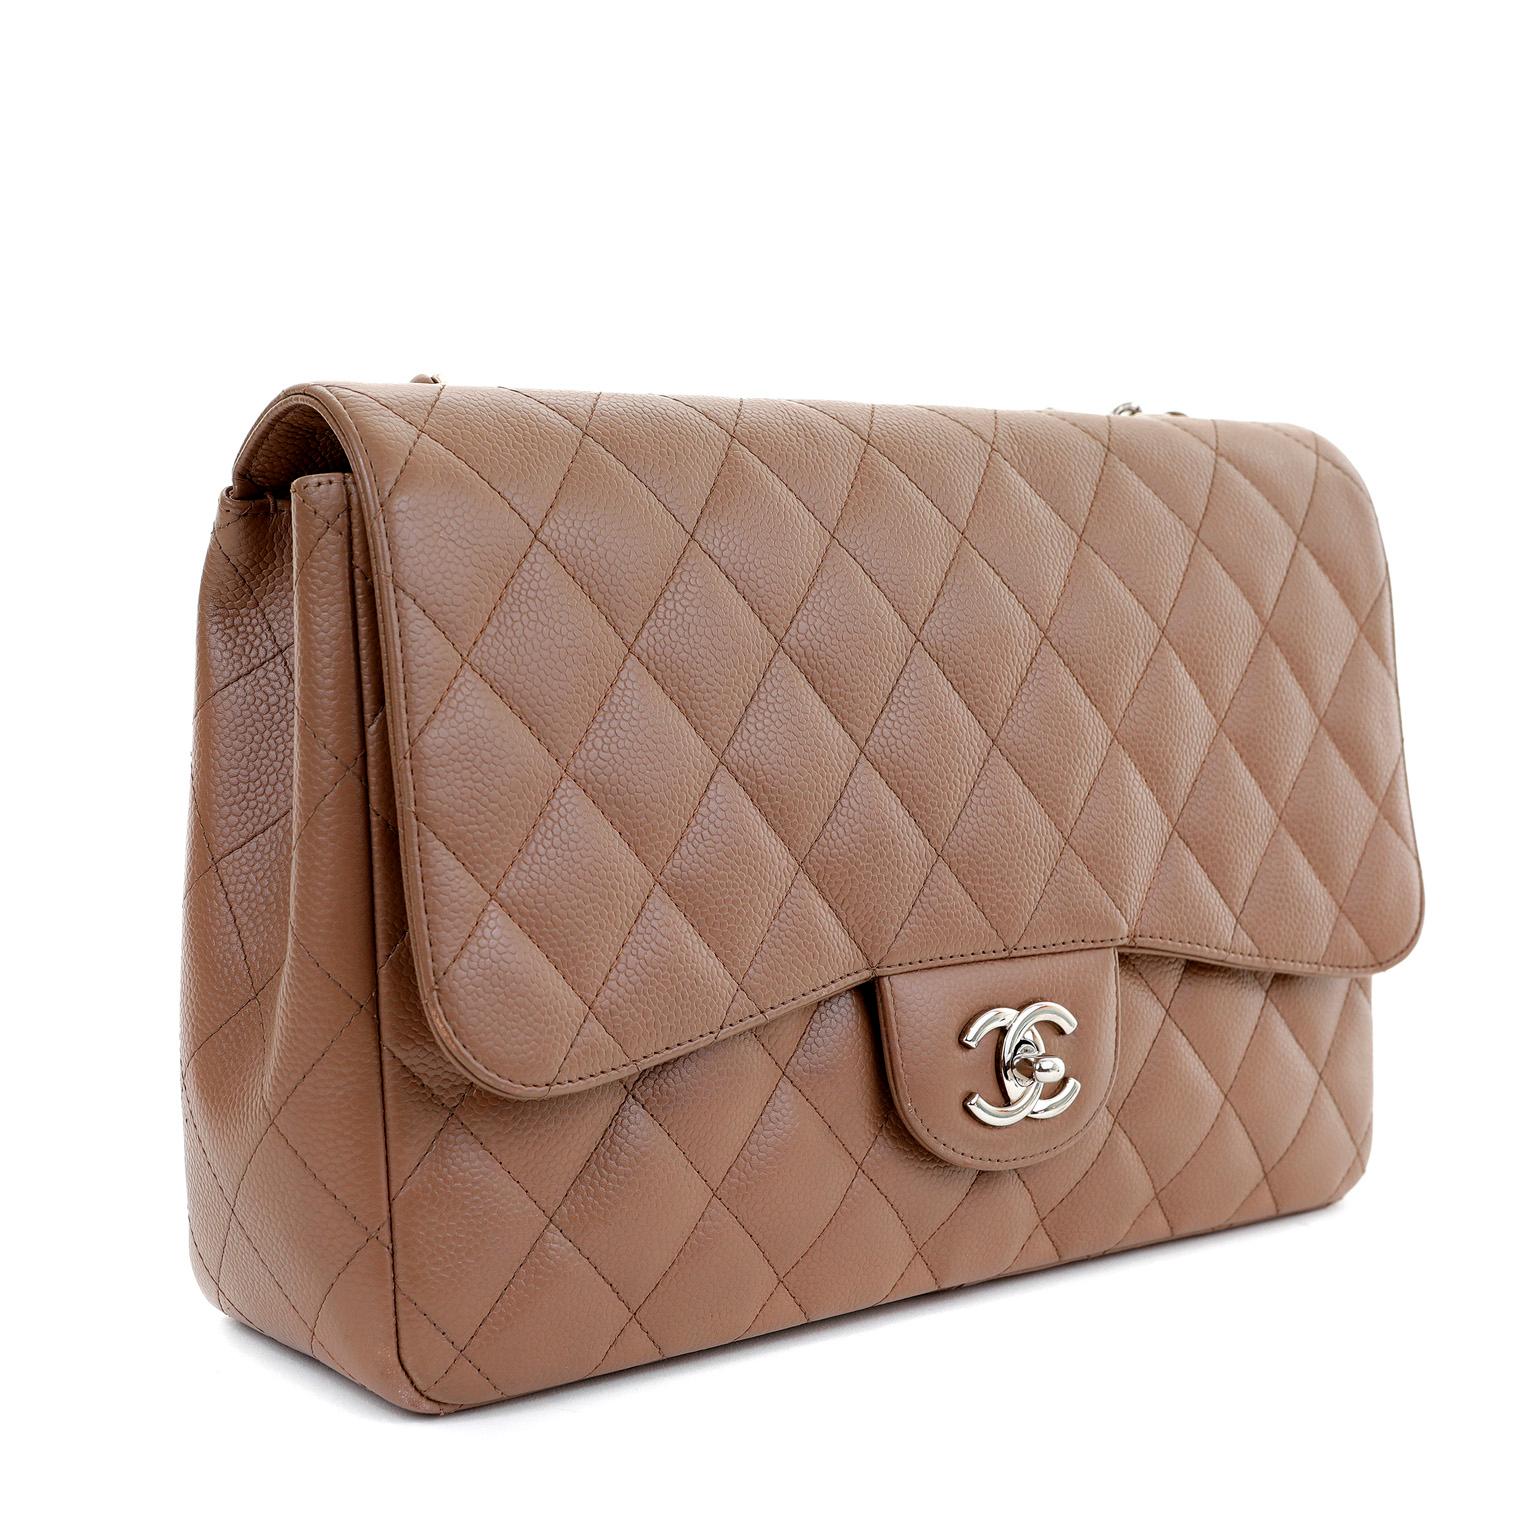 This authentic Chanel Caramel Caviar Jumbo Classic Flap Bag is in pristine condition.  A must have for any collector, the Jumbo Classic is elegant and timeless.

Durable and textured caramel colored caviar leather is quilted in signature Chanel